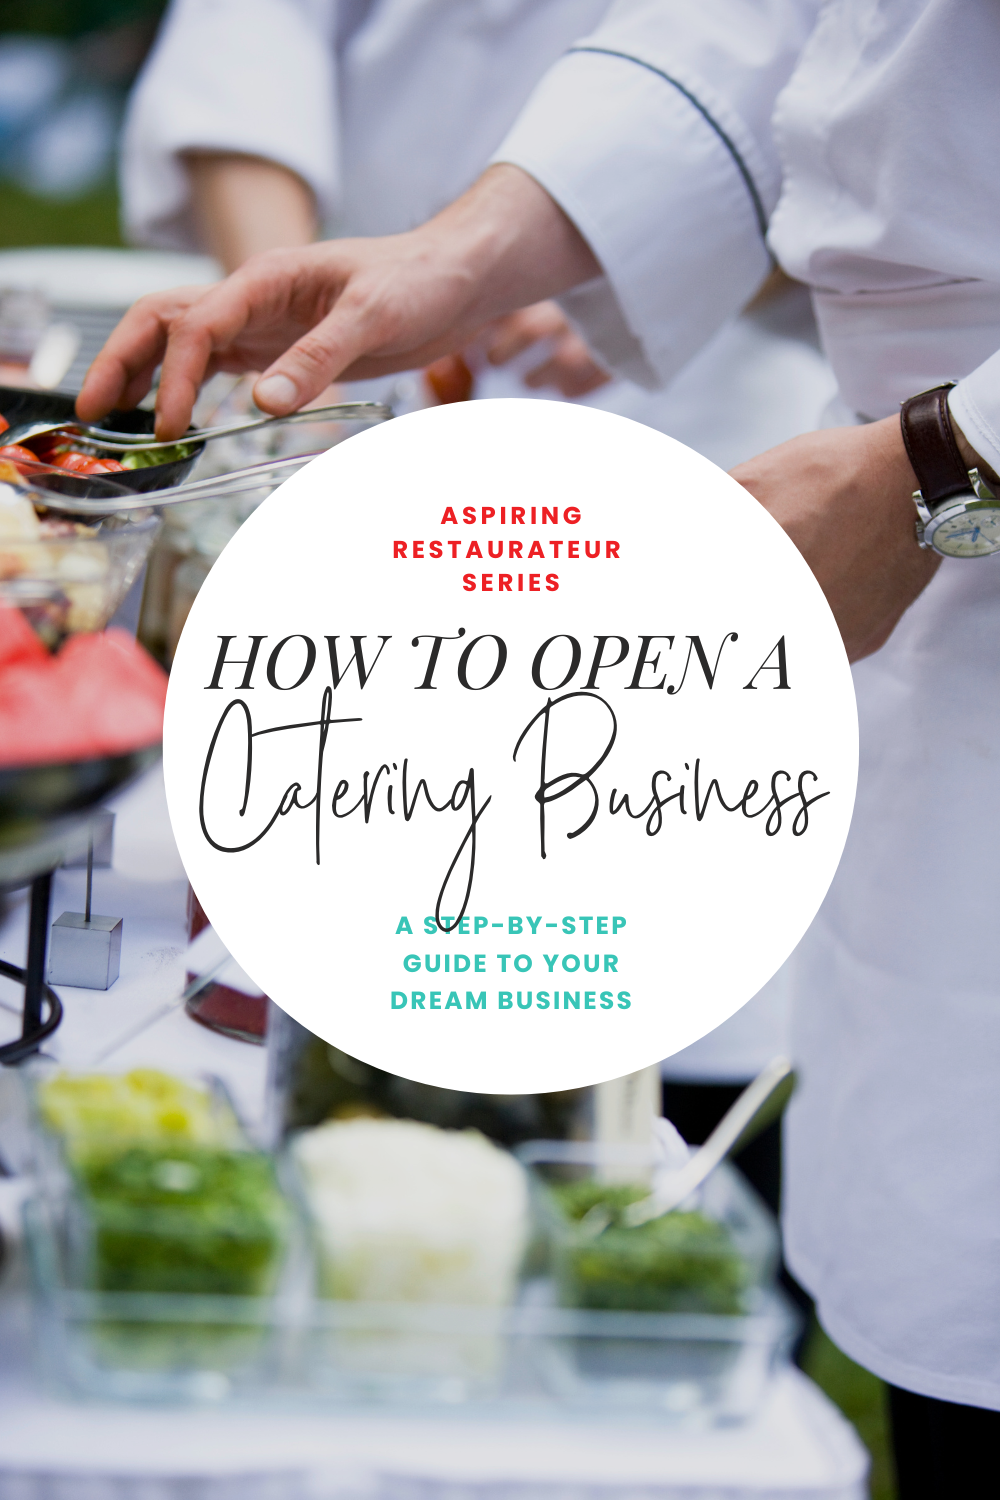 How to Open a Catering Business